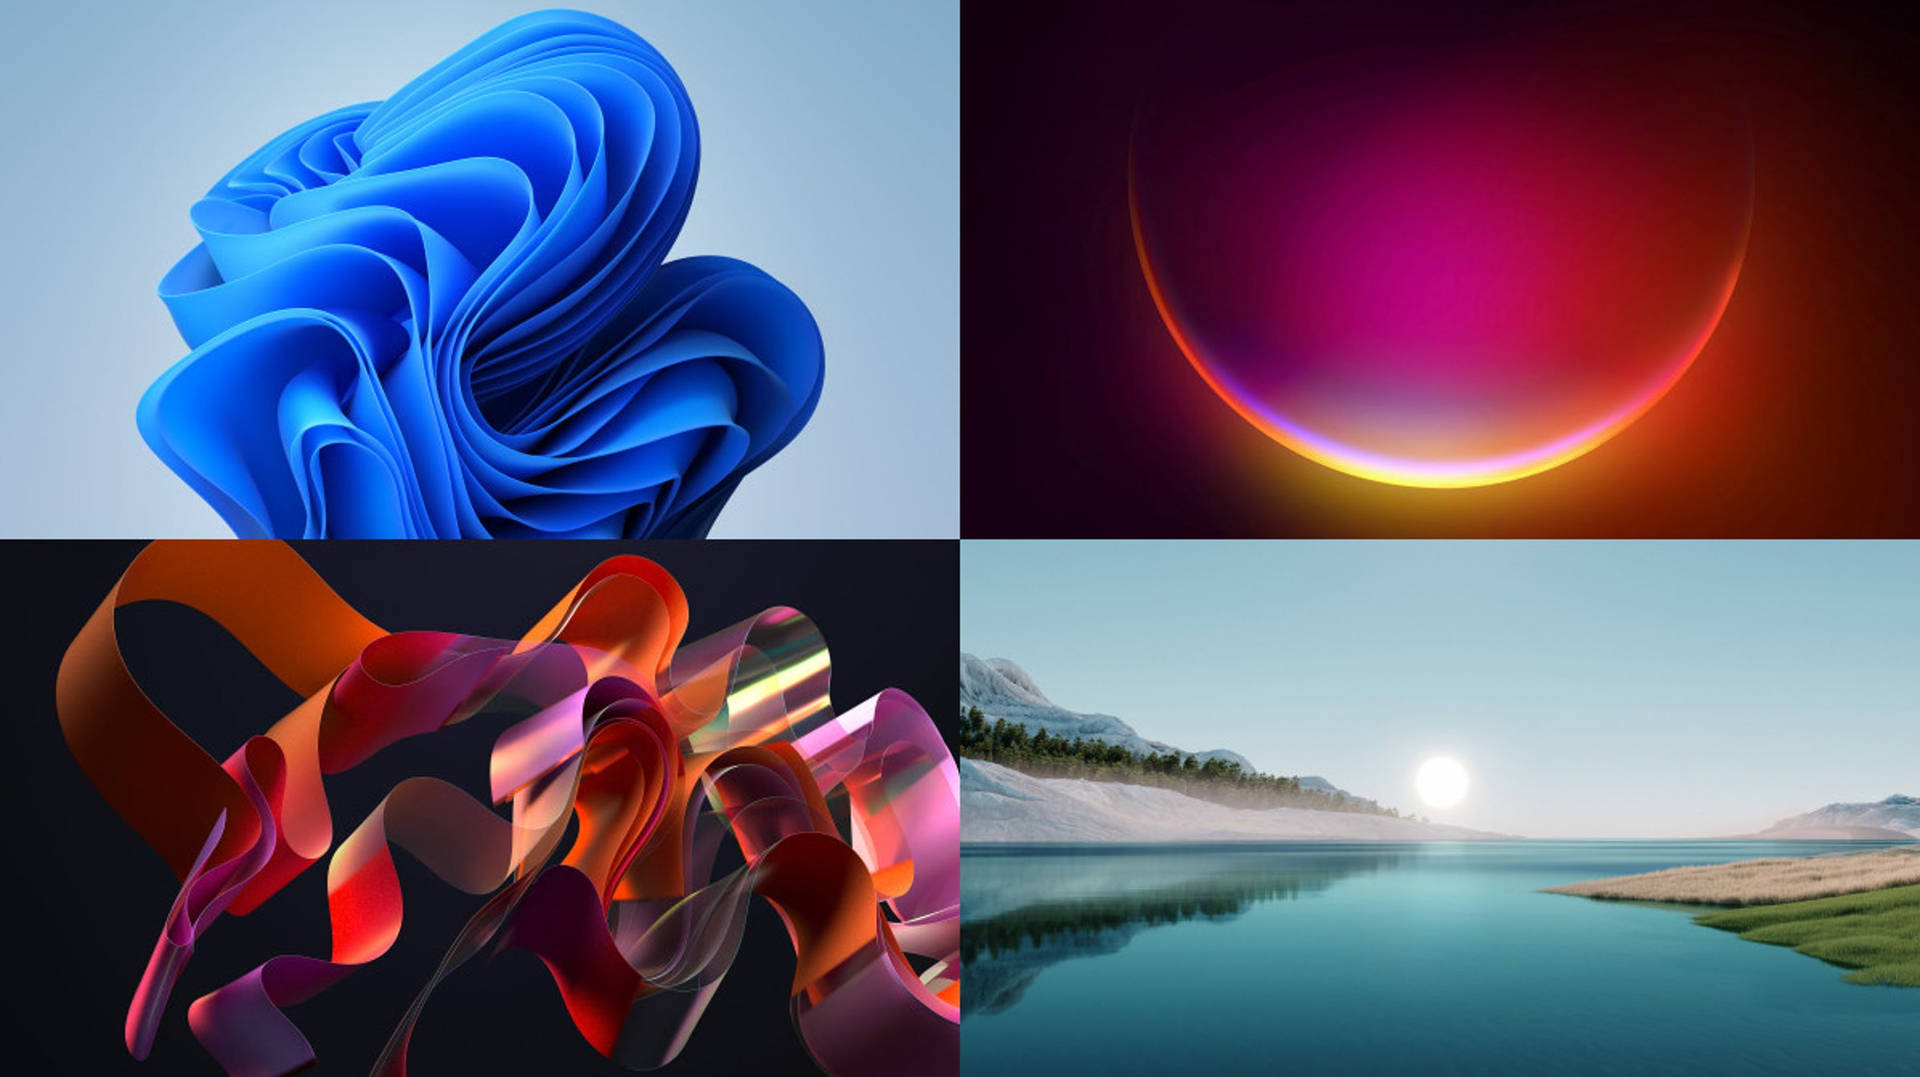 Download Windows 11 Collage Wallpaper | Wallpapers.com